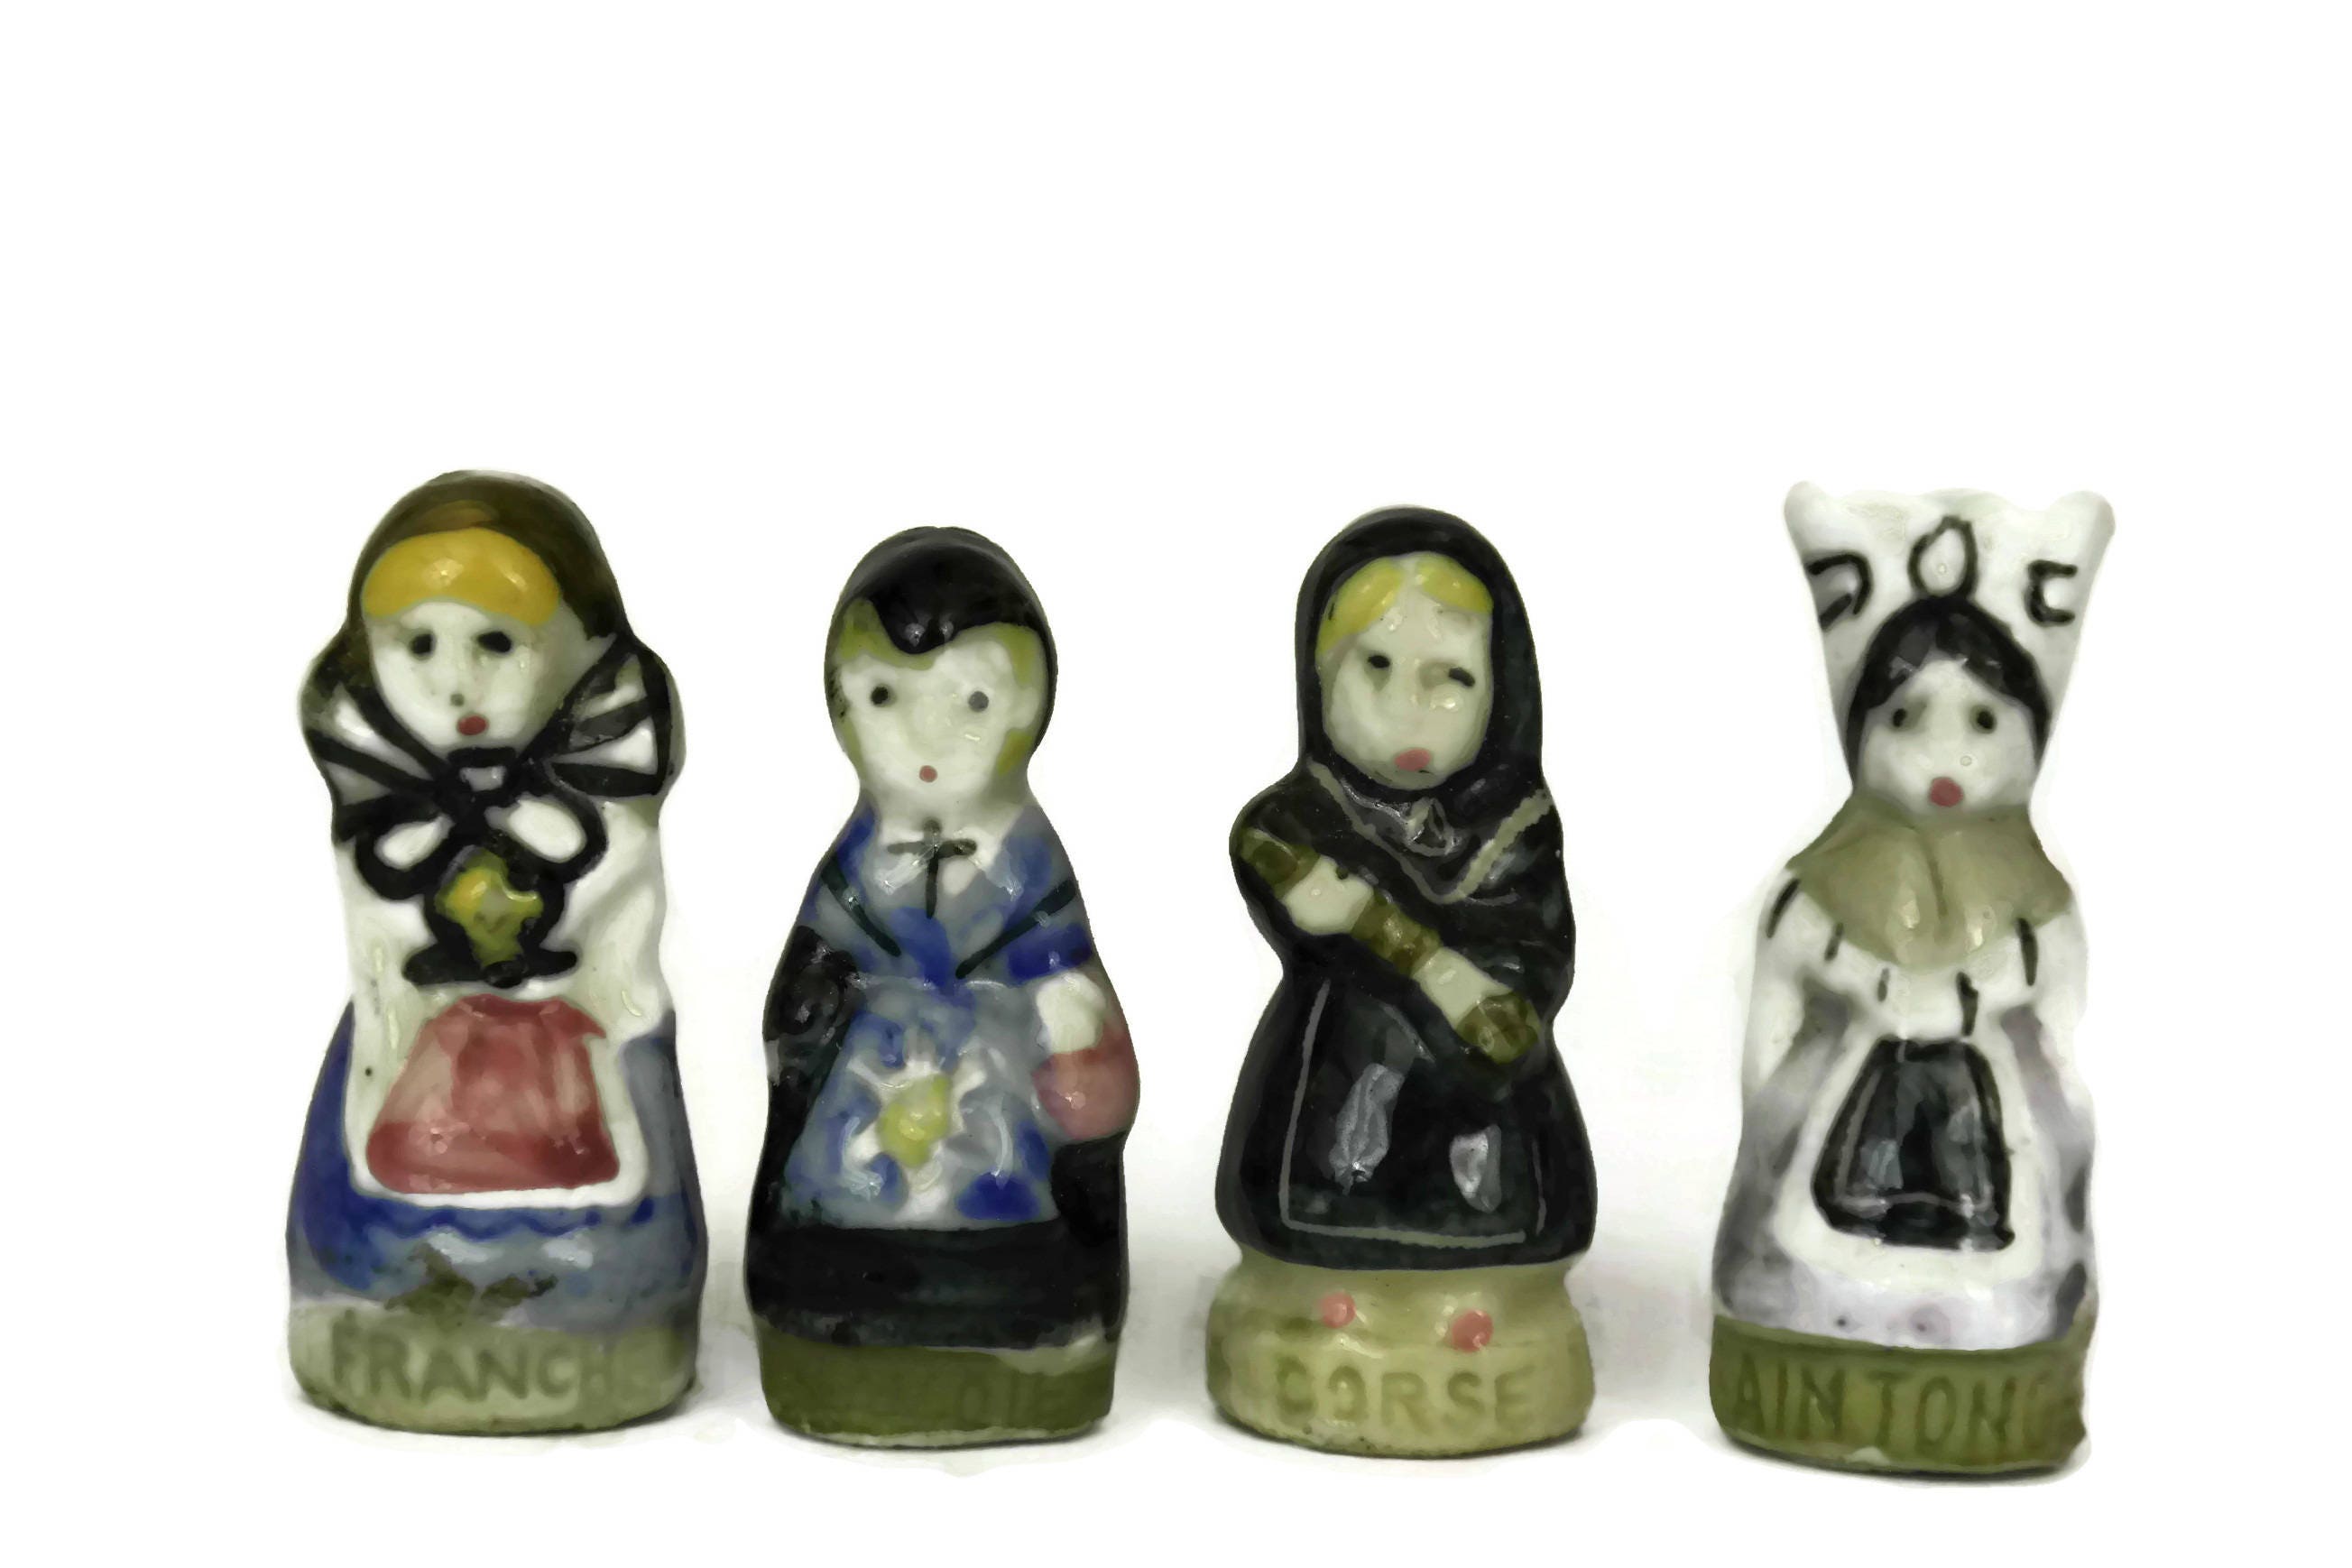 Miniature Porcelain Doll Figurines. Vintage French Feves Collection